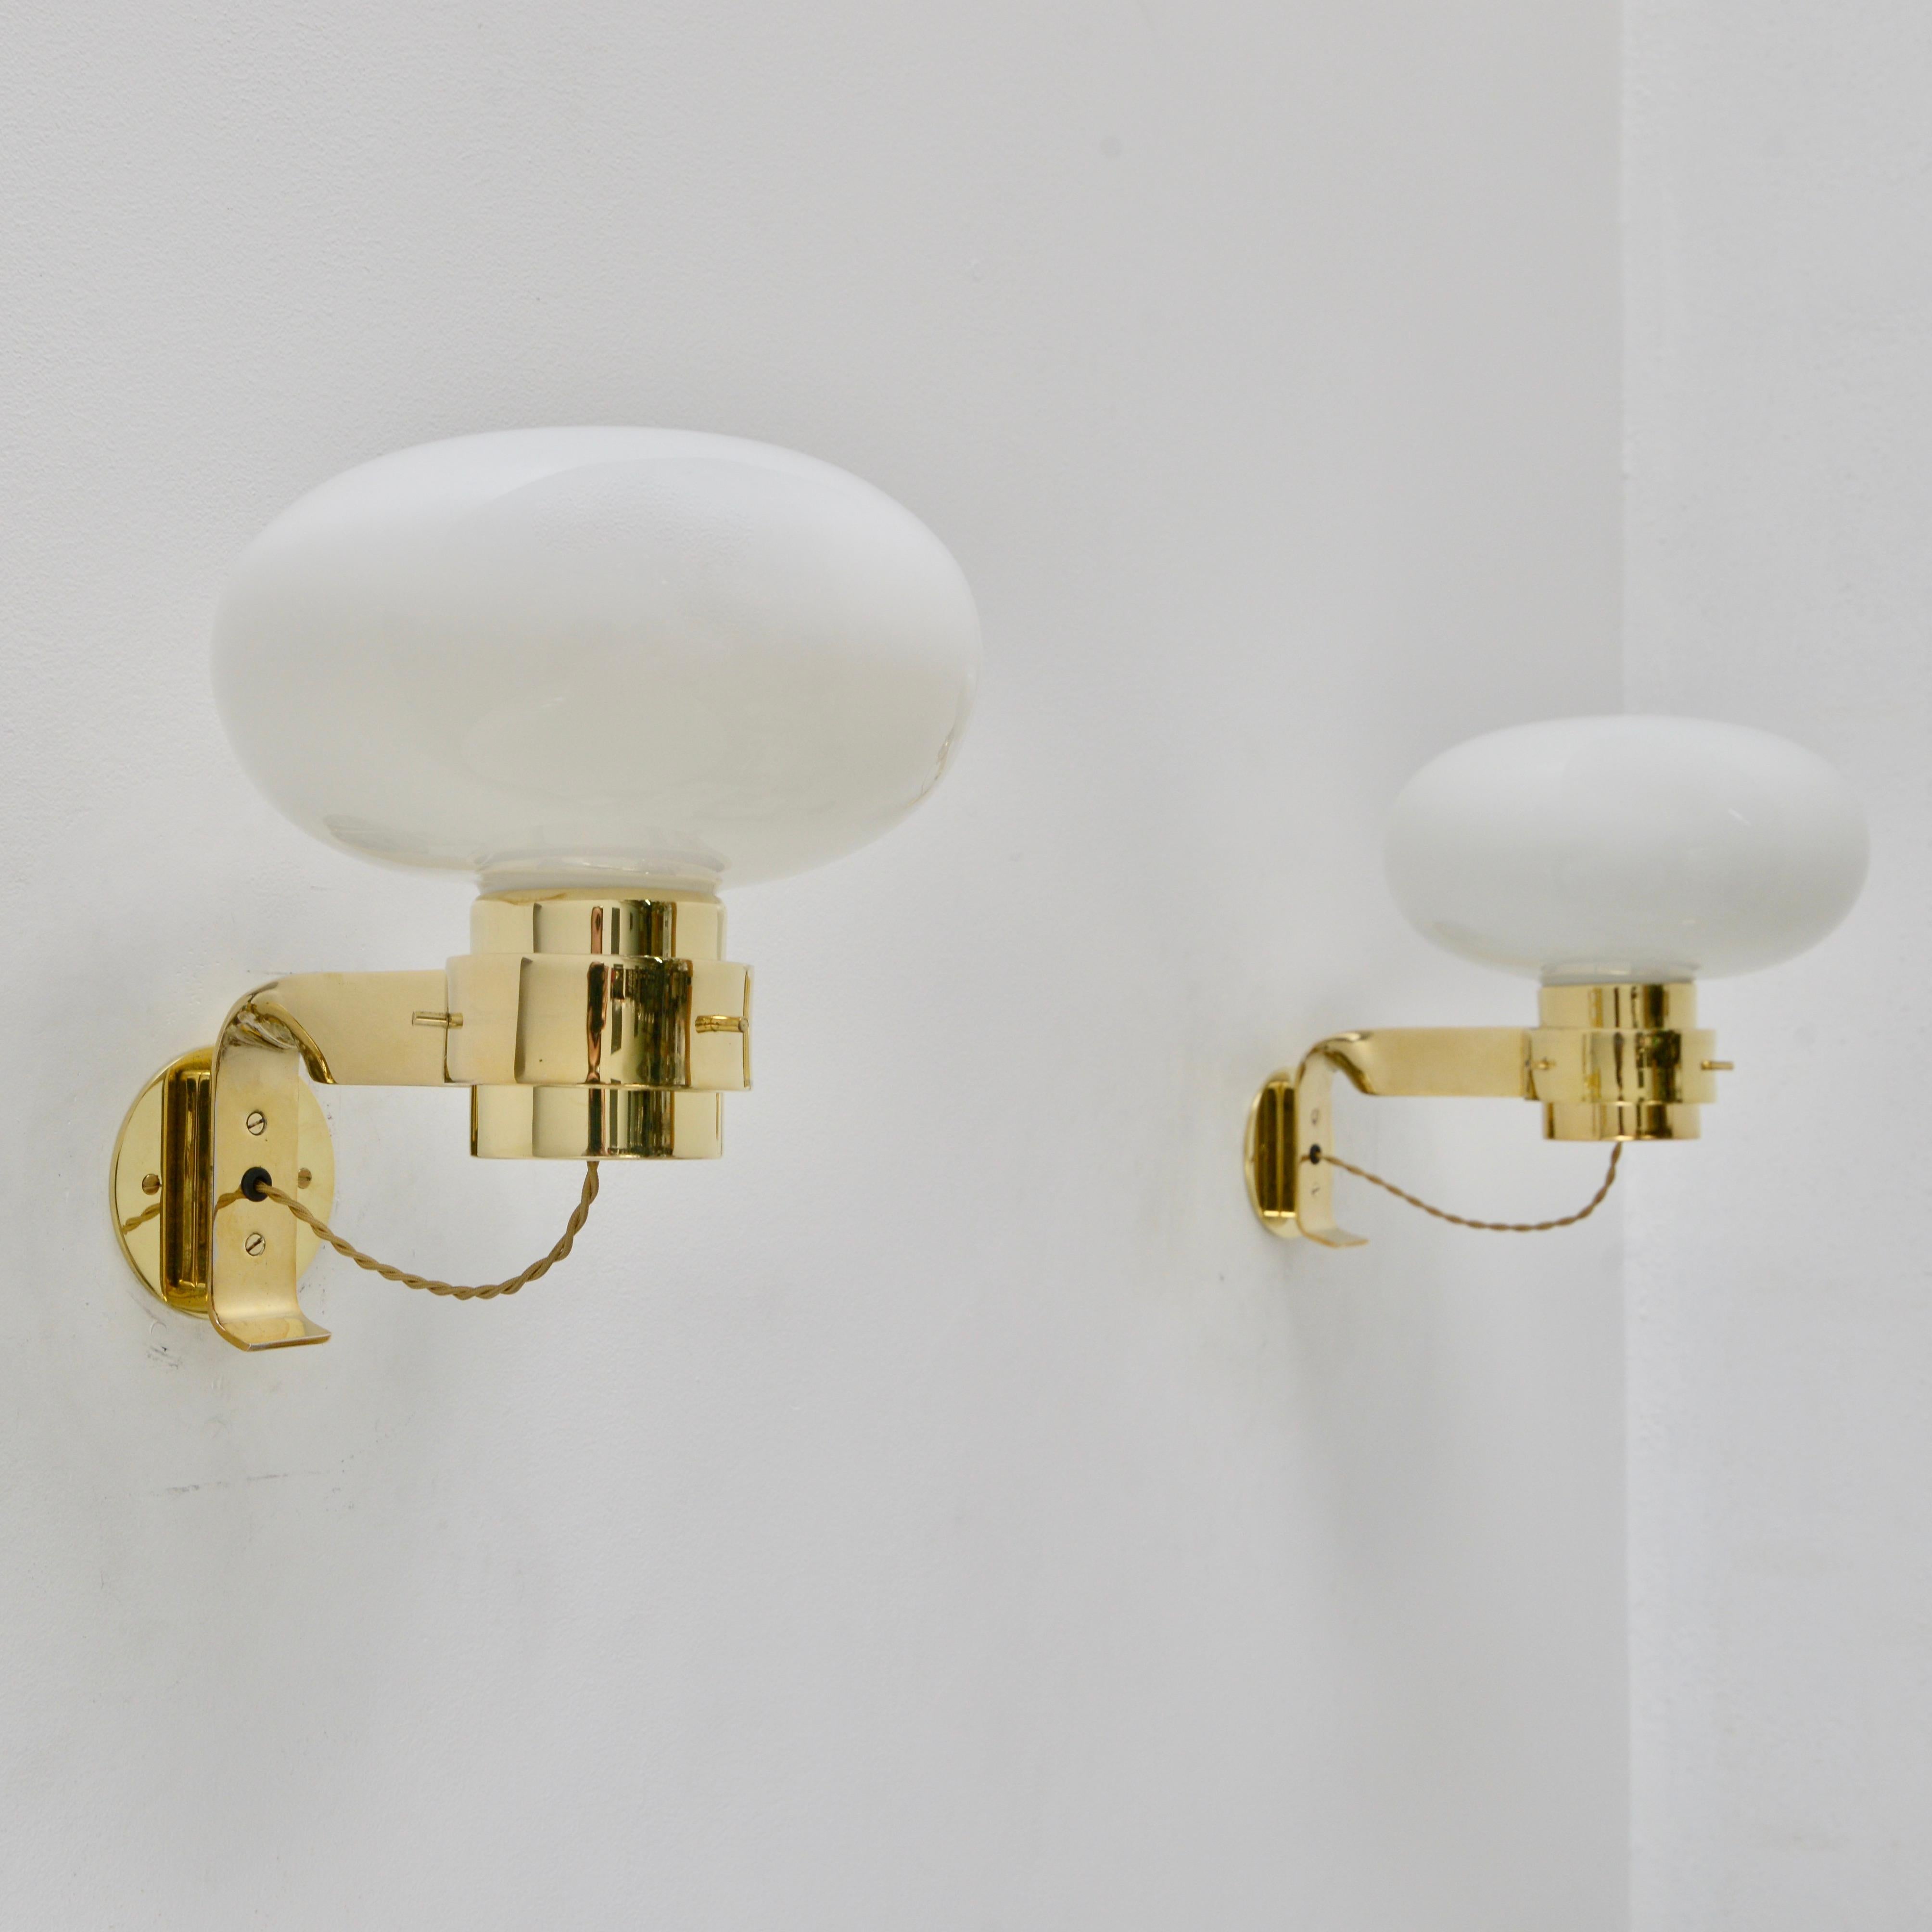 (2) Beautiful Martinelli Luce sconces from 1960s Italy. Made from polished un-lacquered brass and opal glass. The finish will patina over time. Rewired for use in the US with (1) E26 medium based socket per sconce. Light bulbs included with order.